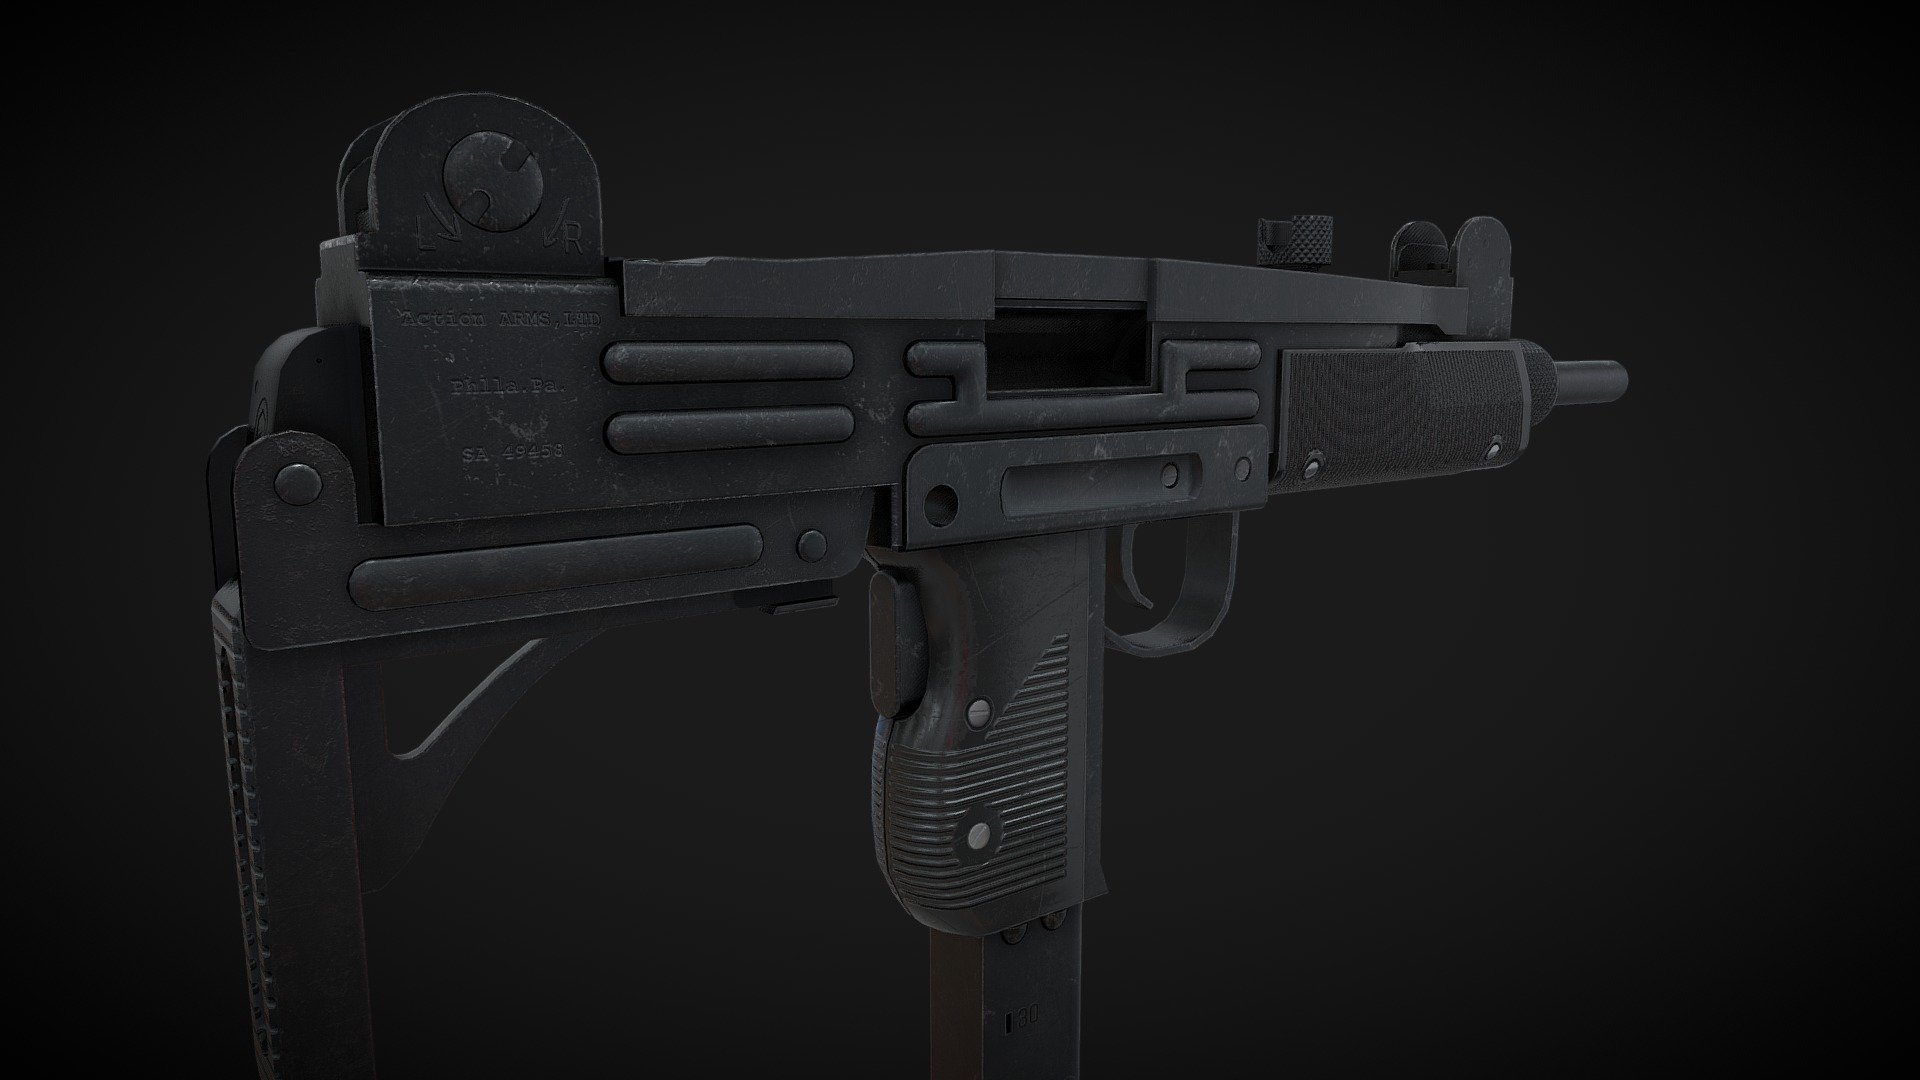 IMI UZI Model B modelled using blender and textured using substance painter.
The model is rigged and has a animation for extended stock.

UZI = 17,761 Tris
UZI Magazine = 1,012 Tris
Bullet = 572 Tris

2 Material with 5 textures.
1 Material for the gun with 4k textures.
1 Material shared by the magazine and the bullet with 1K textures - UZI - Download Free 3D model by Gintoki1234 3d model